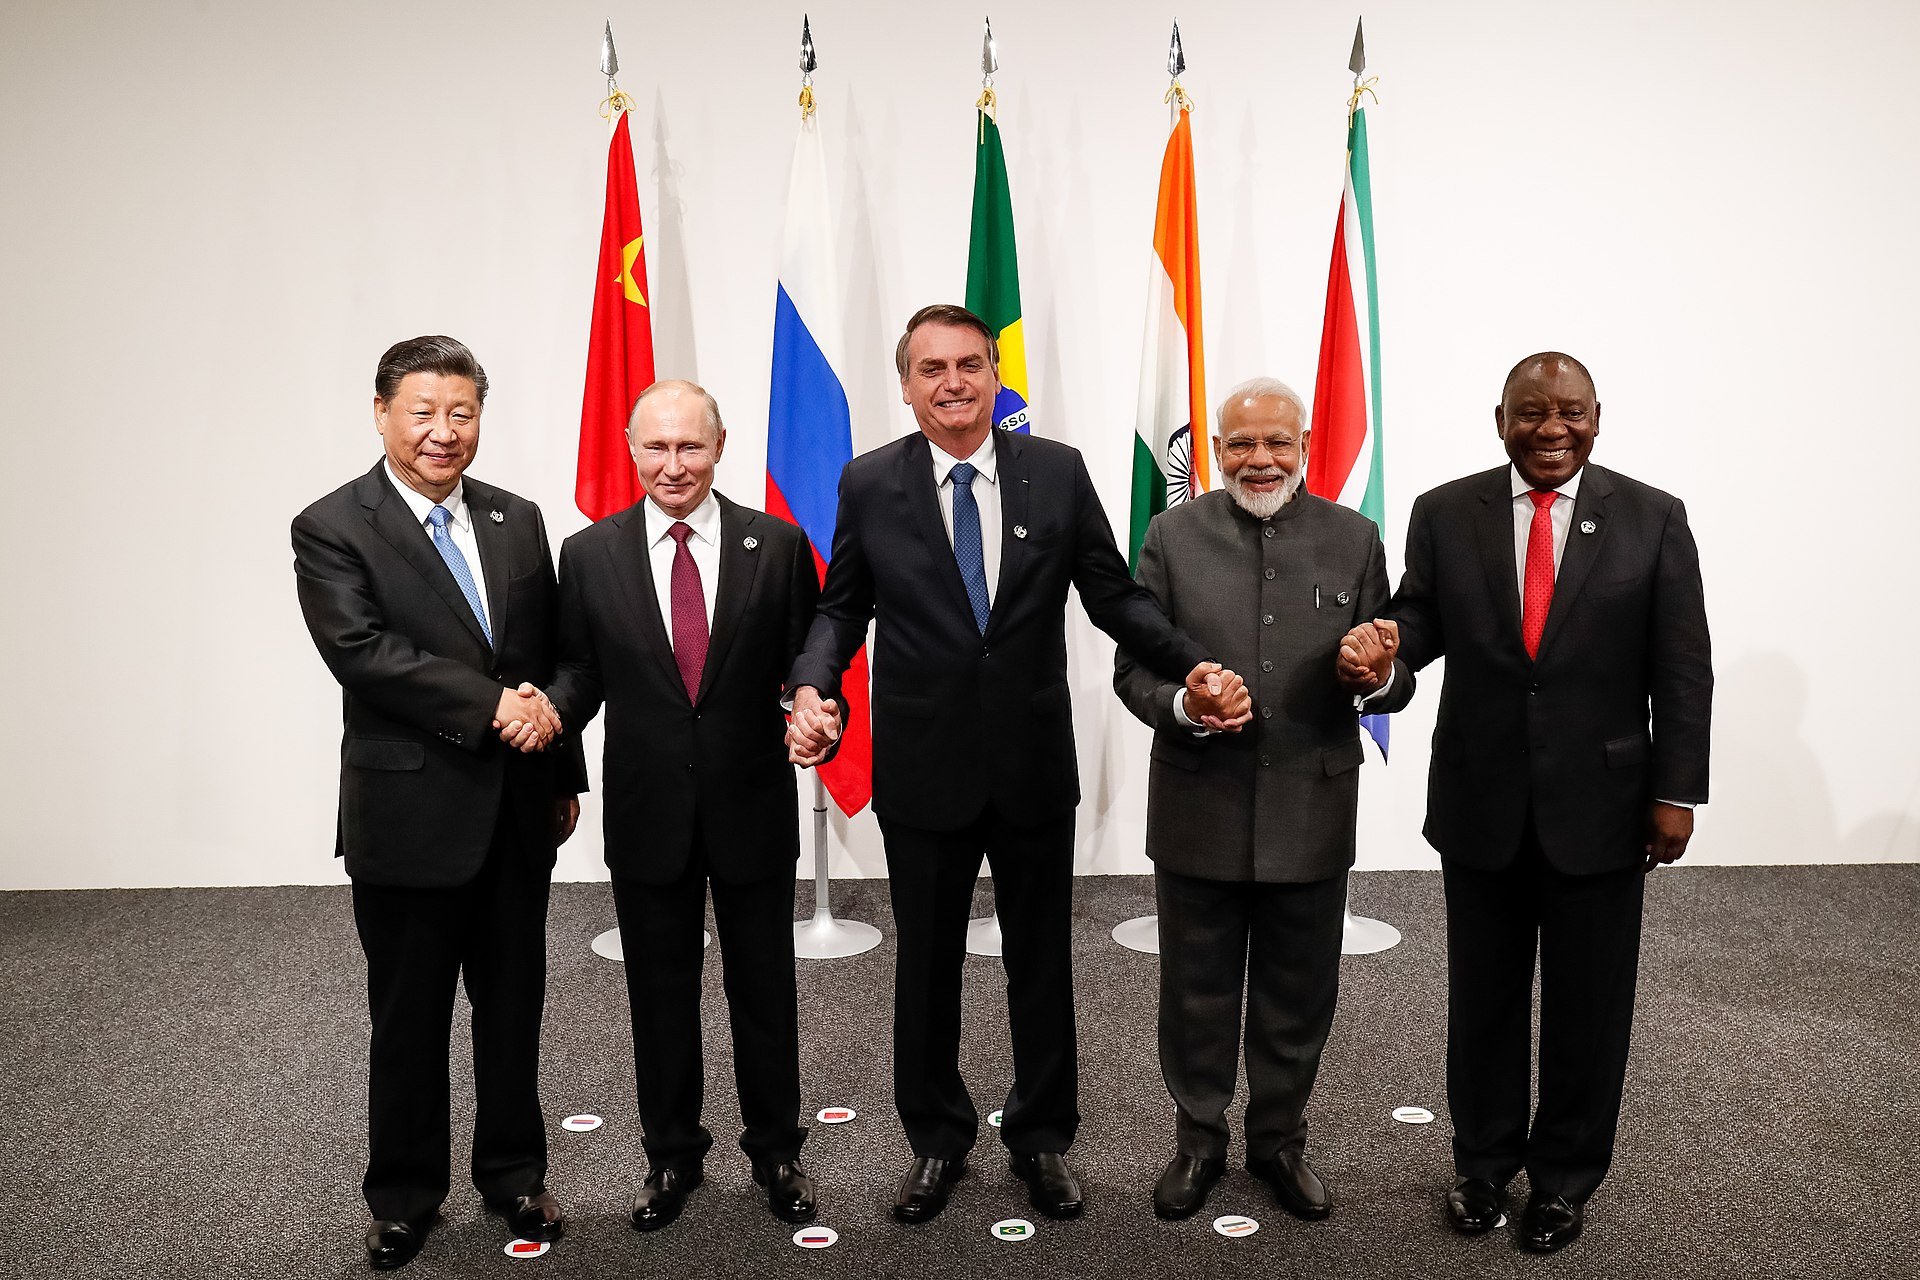 What Happens If the Value of BRICS Tether Drops?